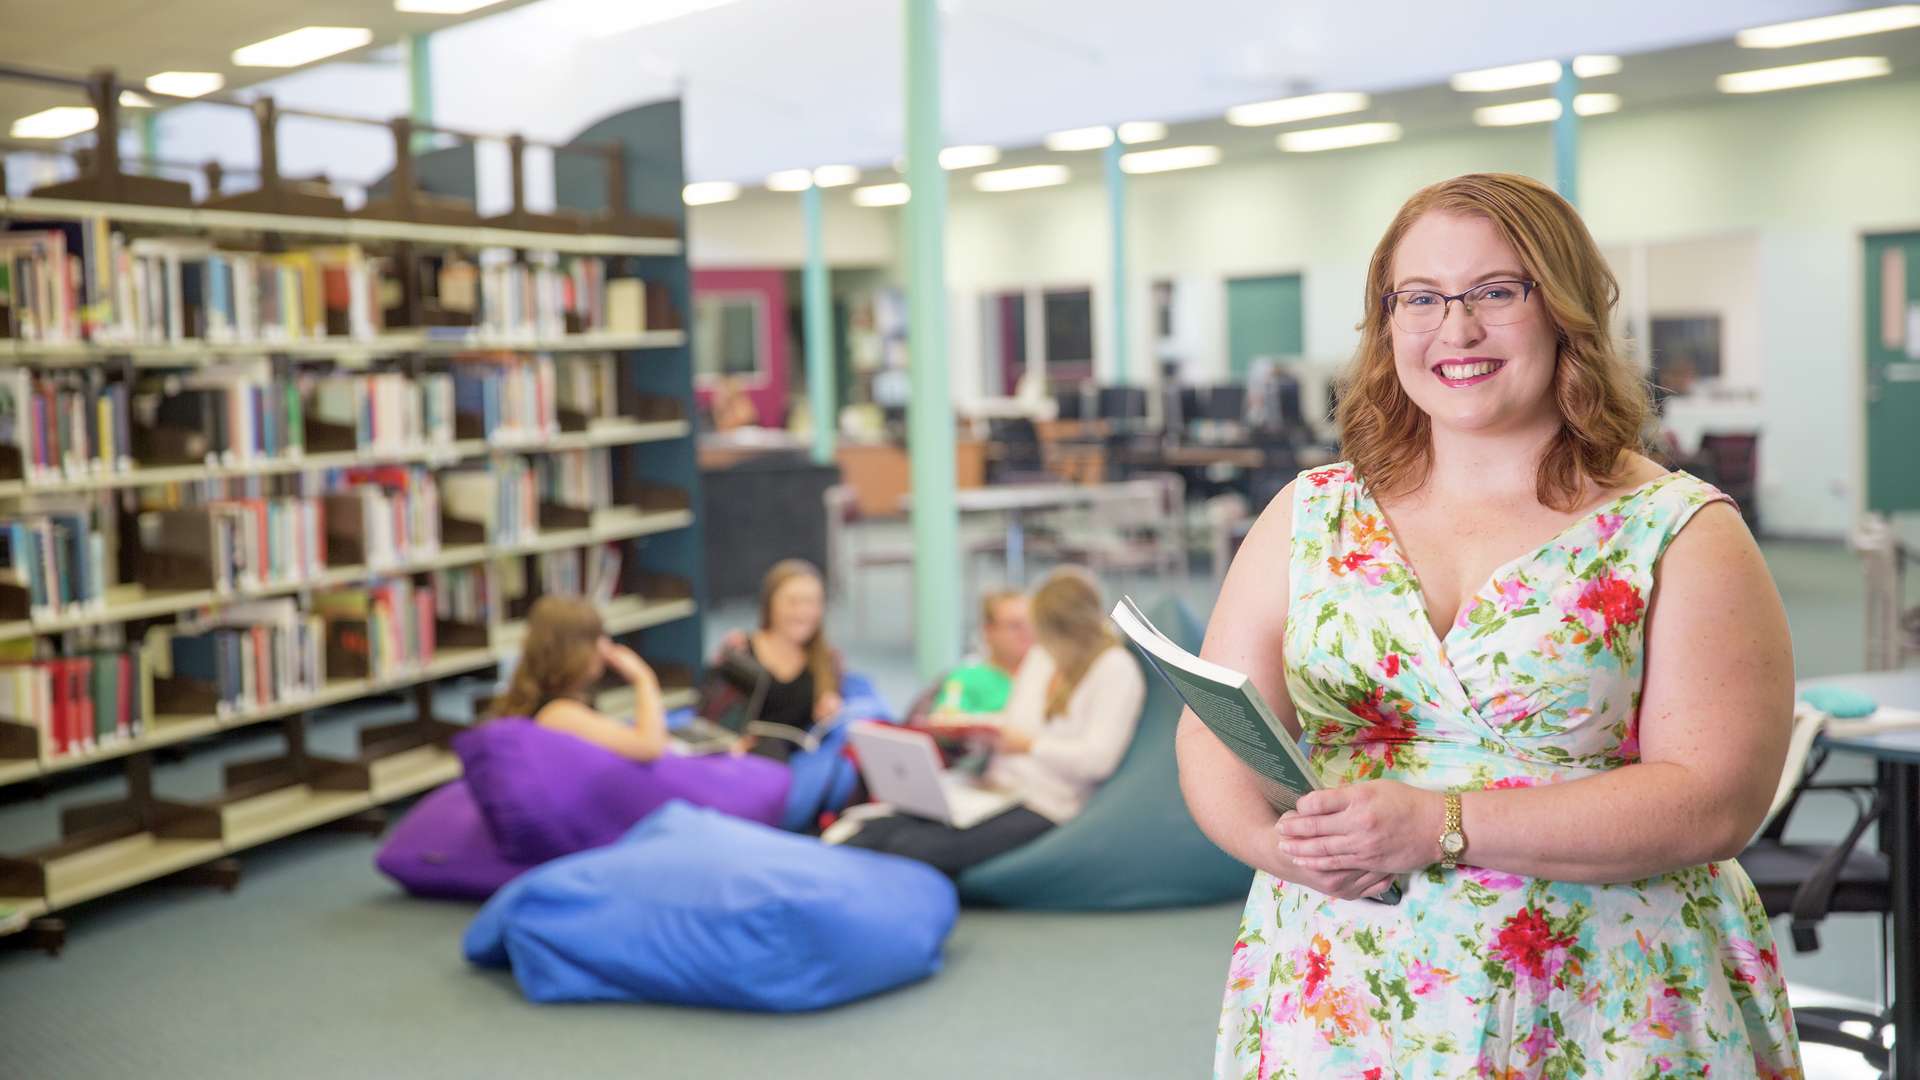 A happy student standing in a CQU library holding a textbook while a study group sits on beanbags in the background